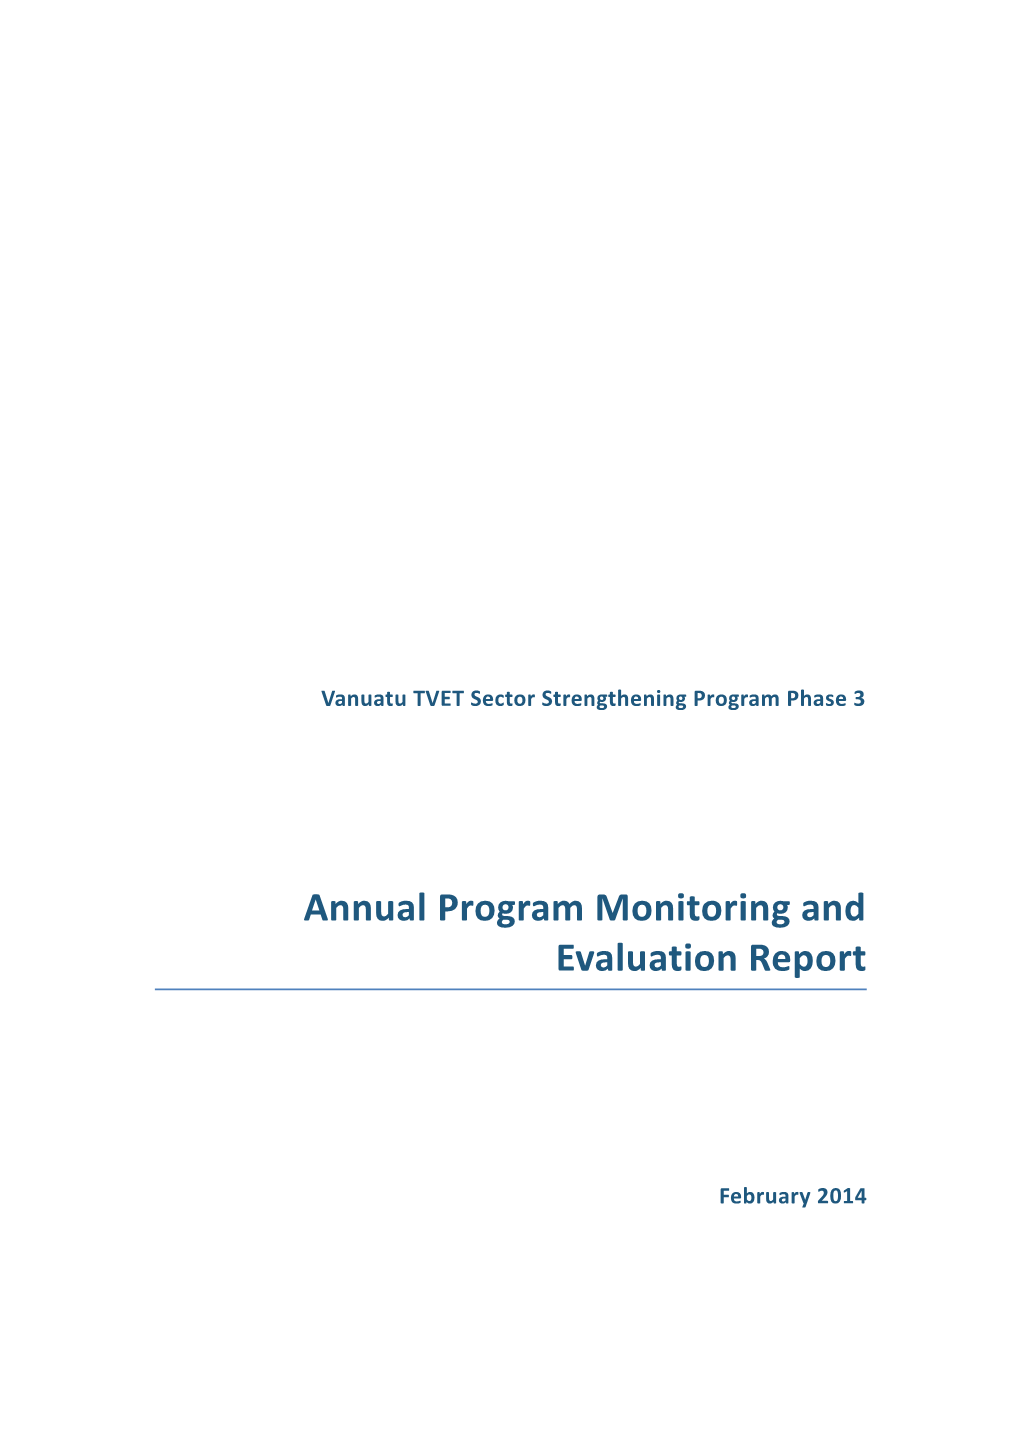 Annual Program Monitoring and Evaluation Report